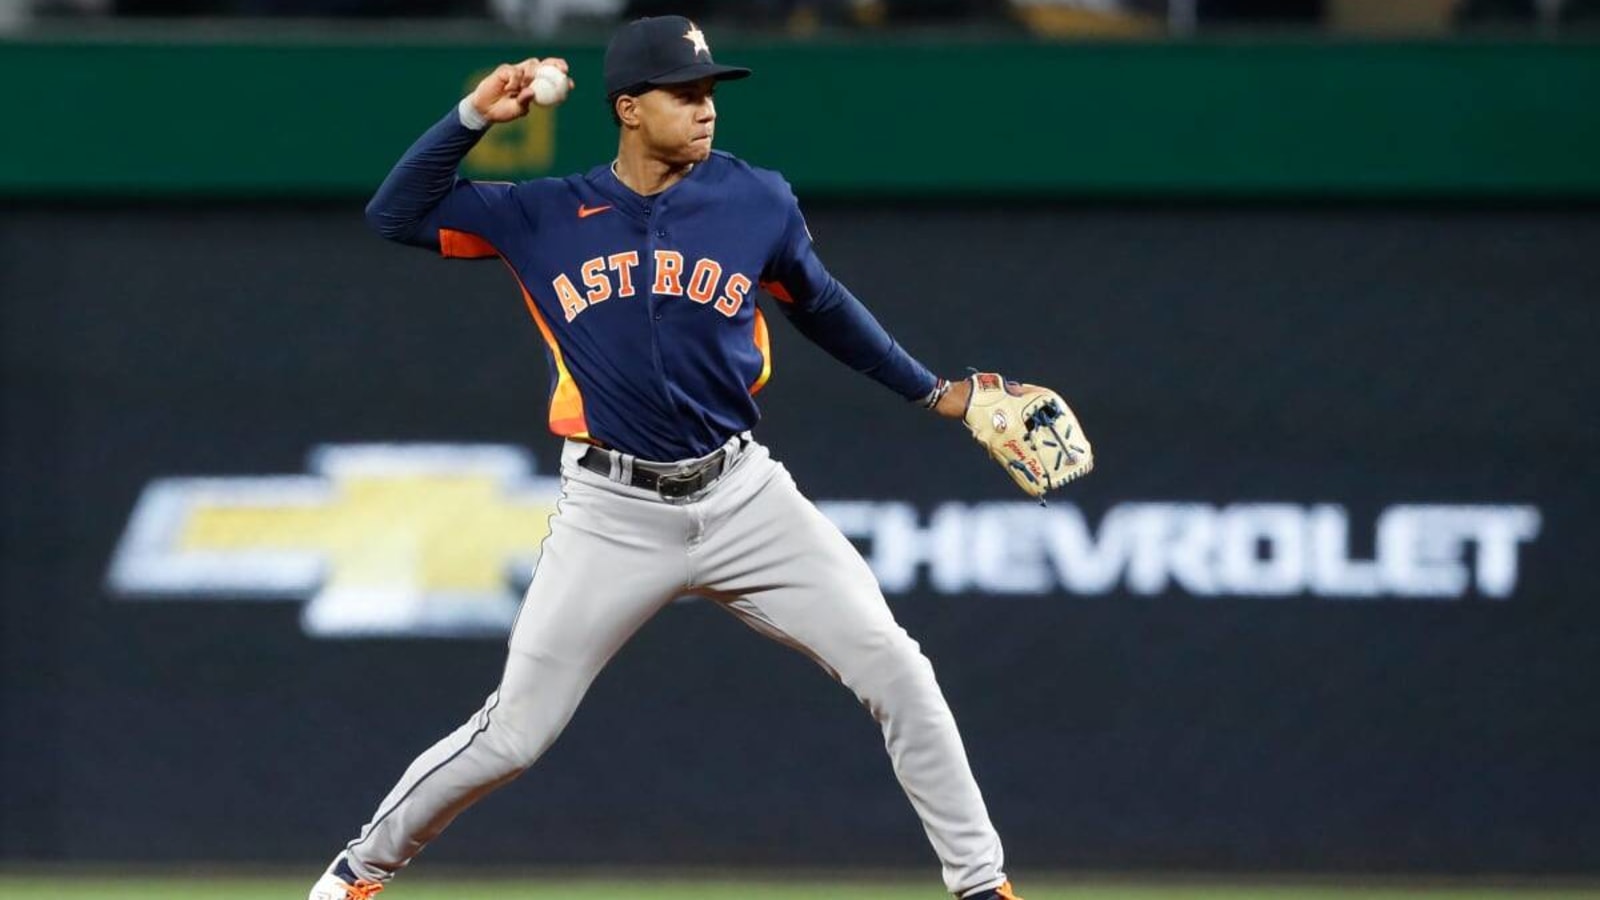 Astros Receive Unexpected Spark From Julks